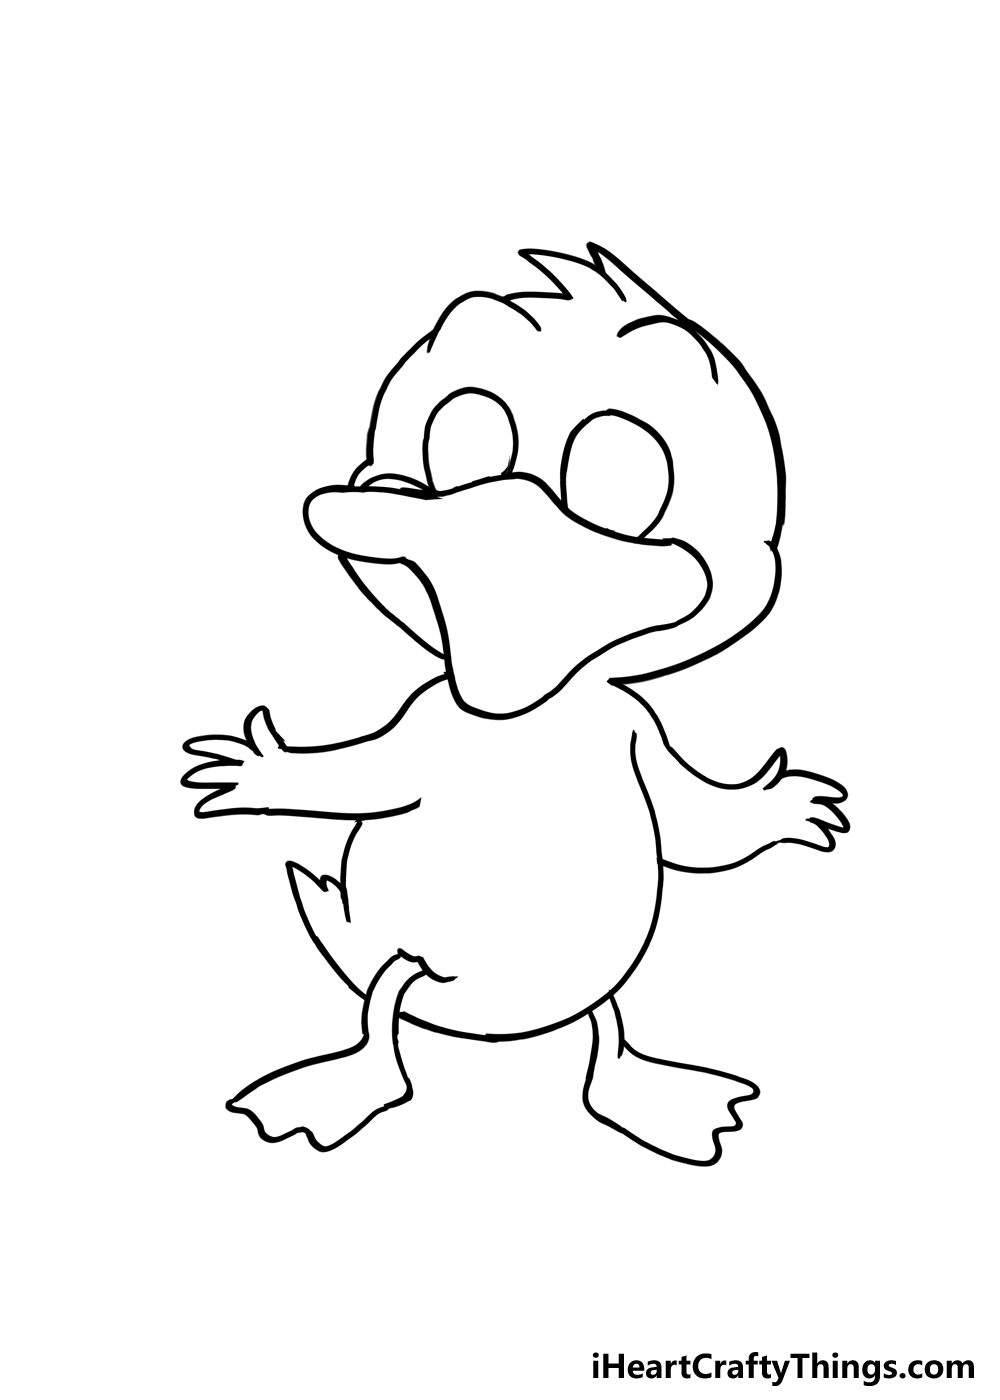 How to Draw A Cartoon Duck step 3